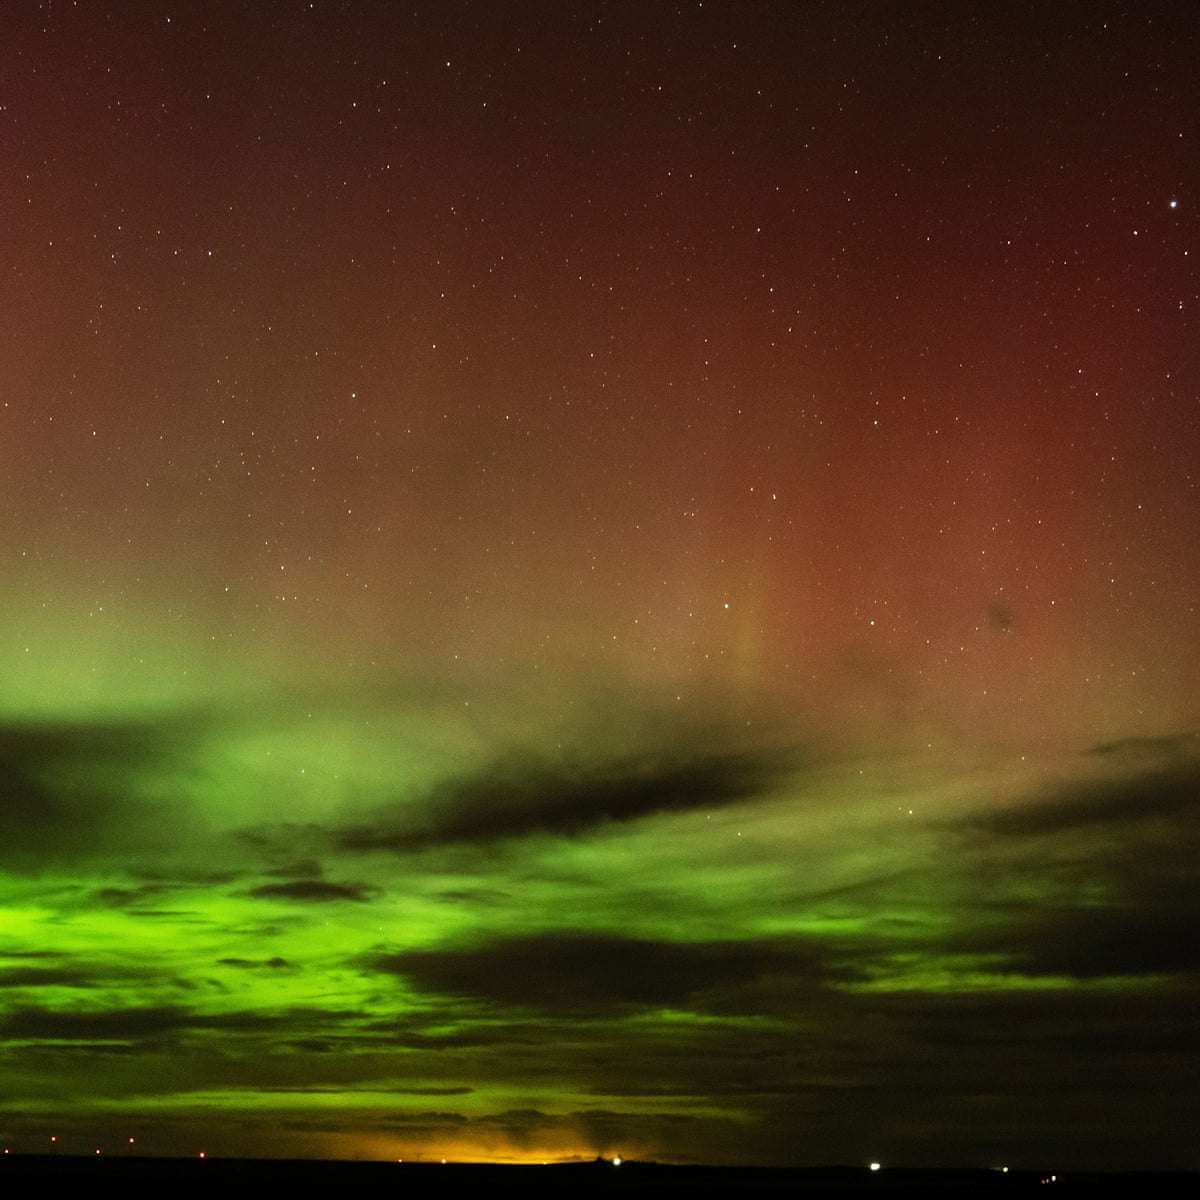 Northern lights could be visible in more than a dozen US states this week, US news